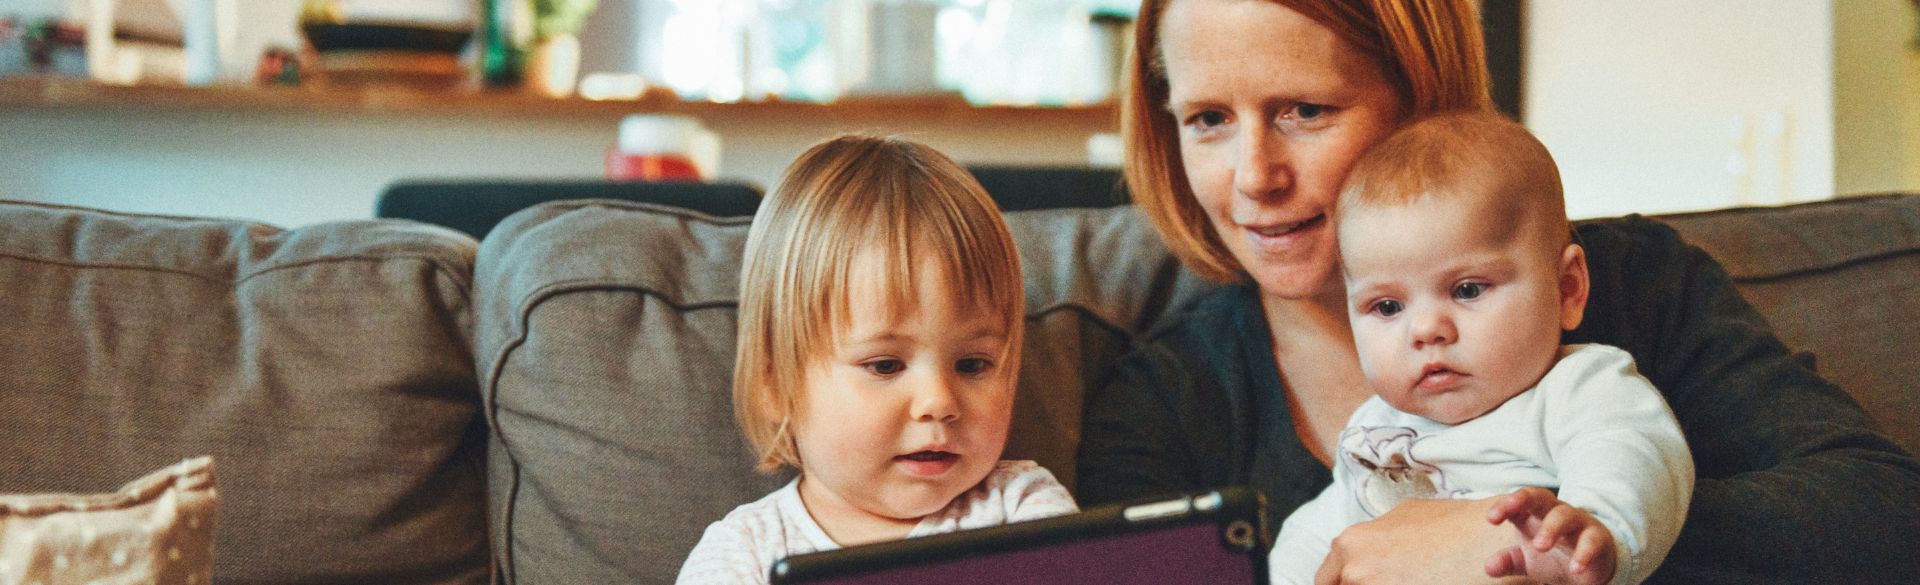 Mom sitting with 2 kids on couch looking at ipad